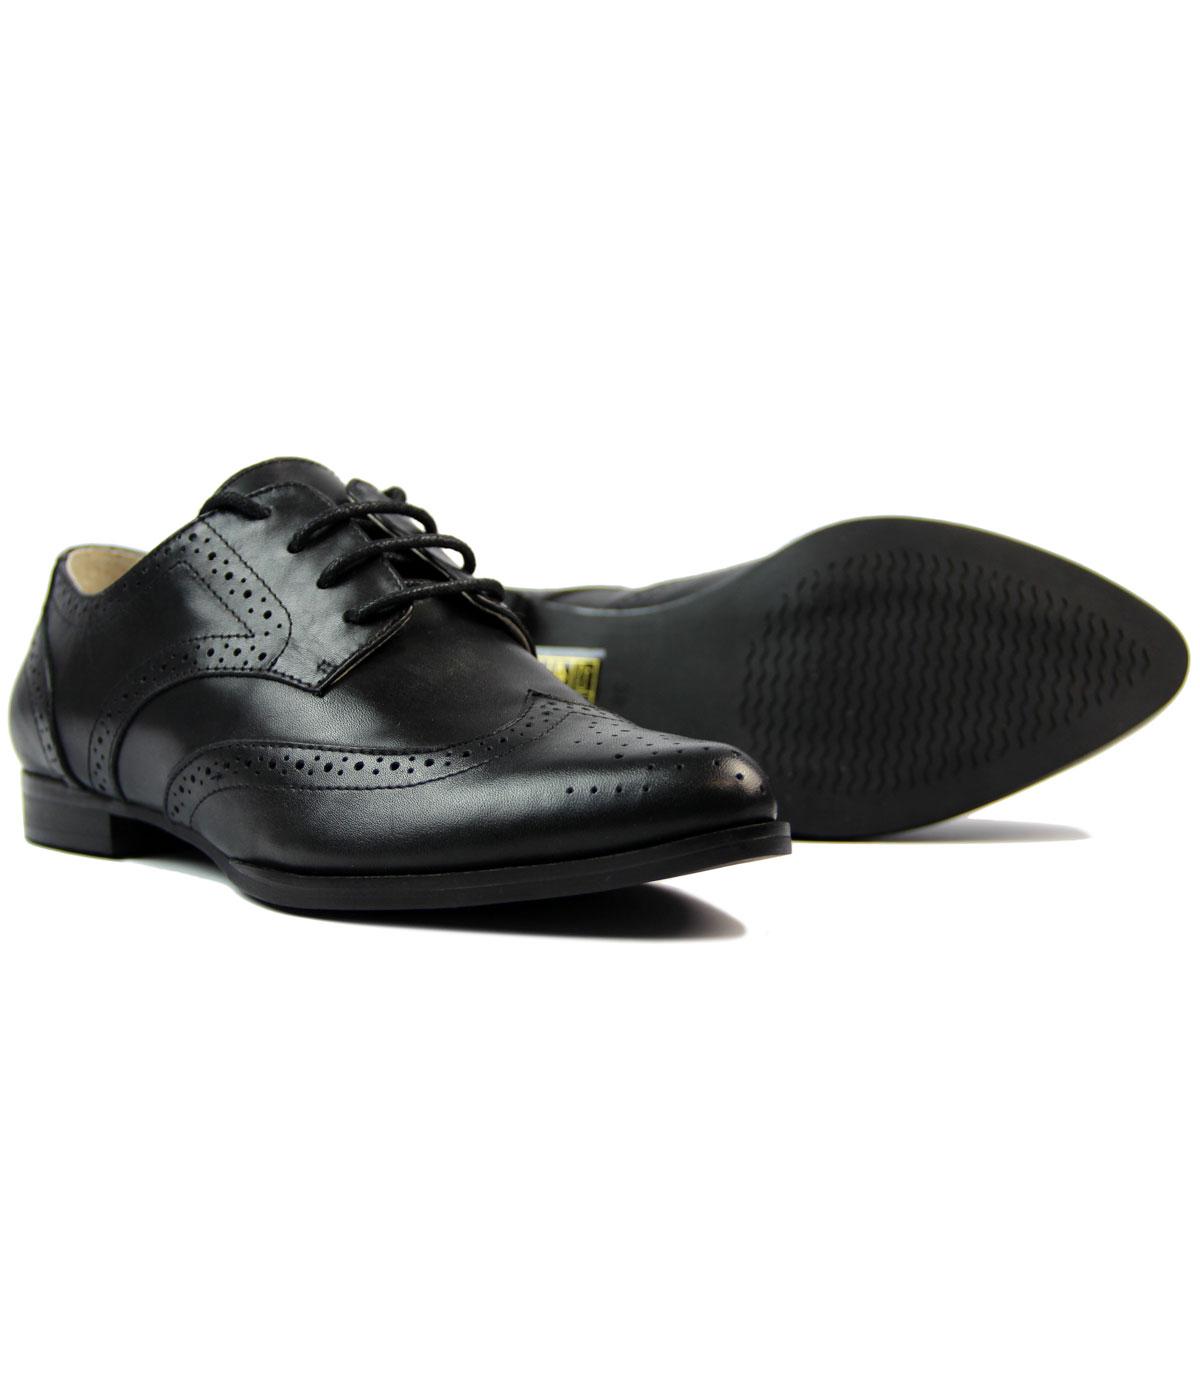 LACEYS Parthina Retro 60s Mod Waxy leather Winklepicker Brogues